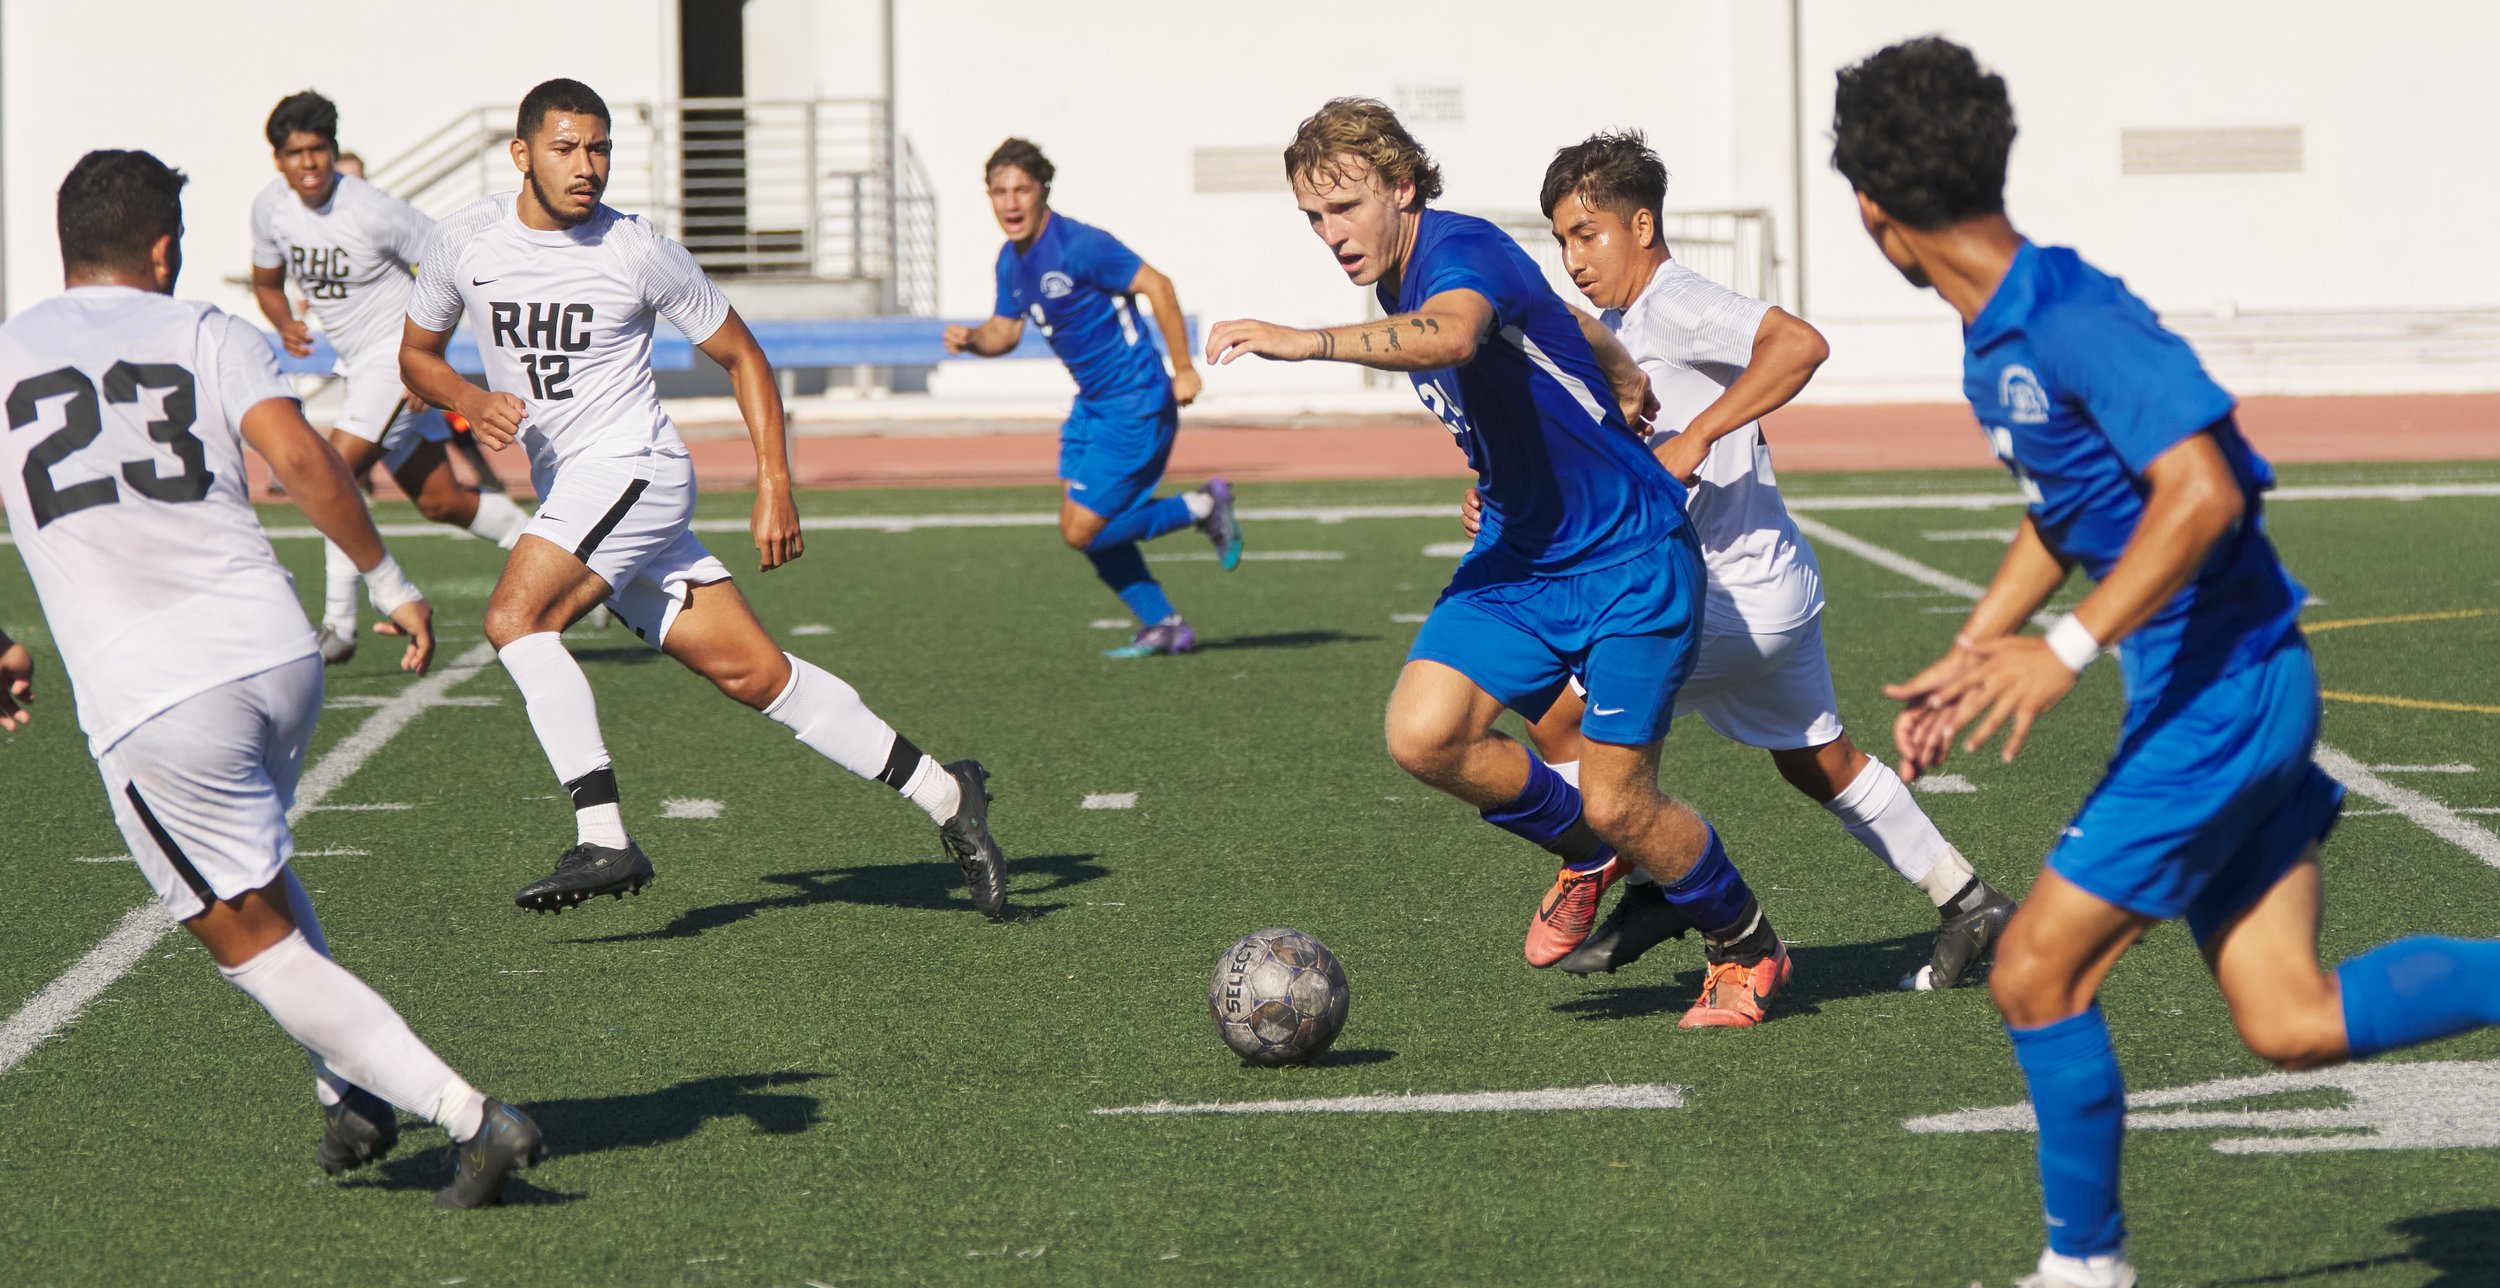  Santa Monica College Corsairs' Alexander Lalor (third from right) and Rio Hondo College Roadrunners' Alexis Perez (third from left) during the men's soccer match on Friday, Sept. 24, 2022, at Corsair Field in Santa Monica, Calif. The Corsairs won 2-